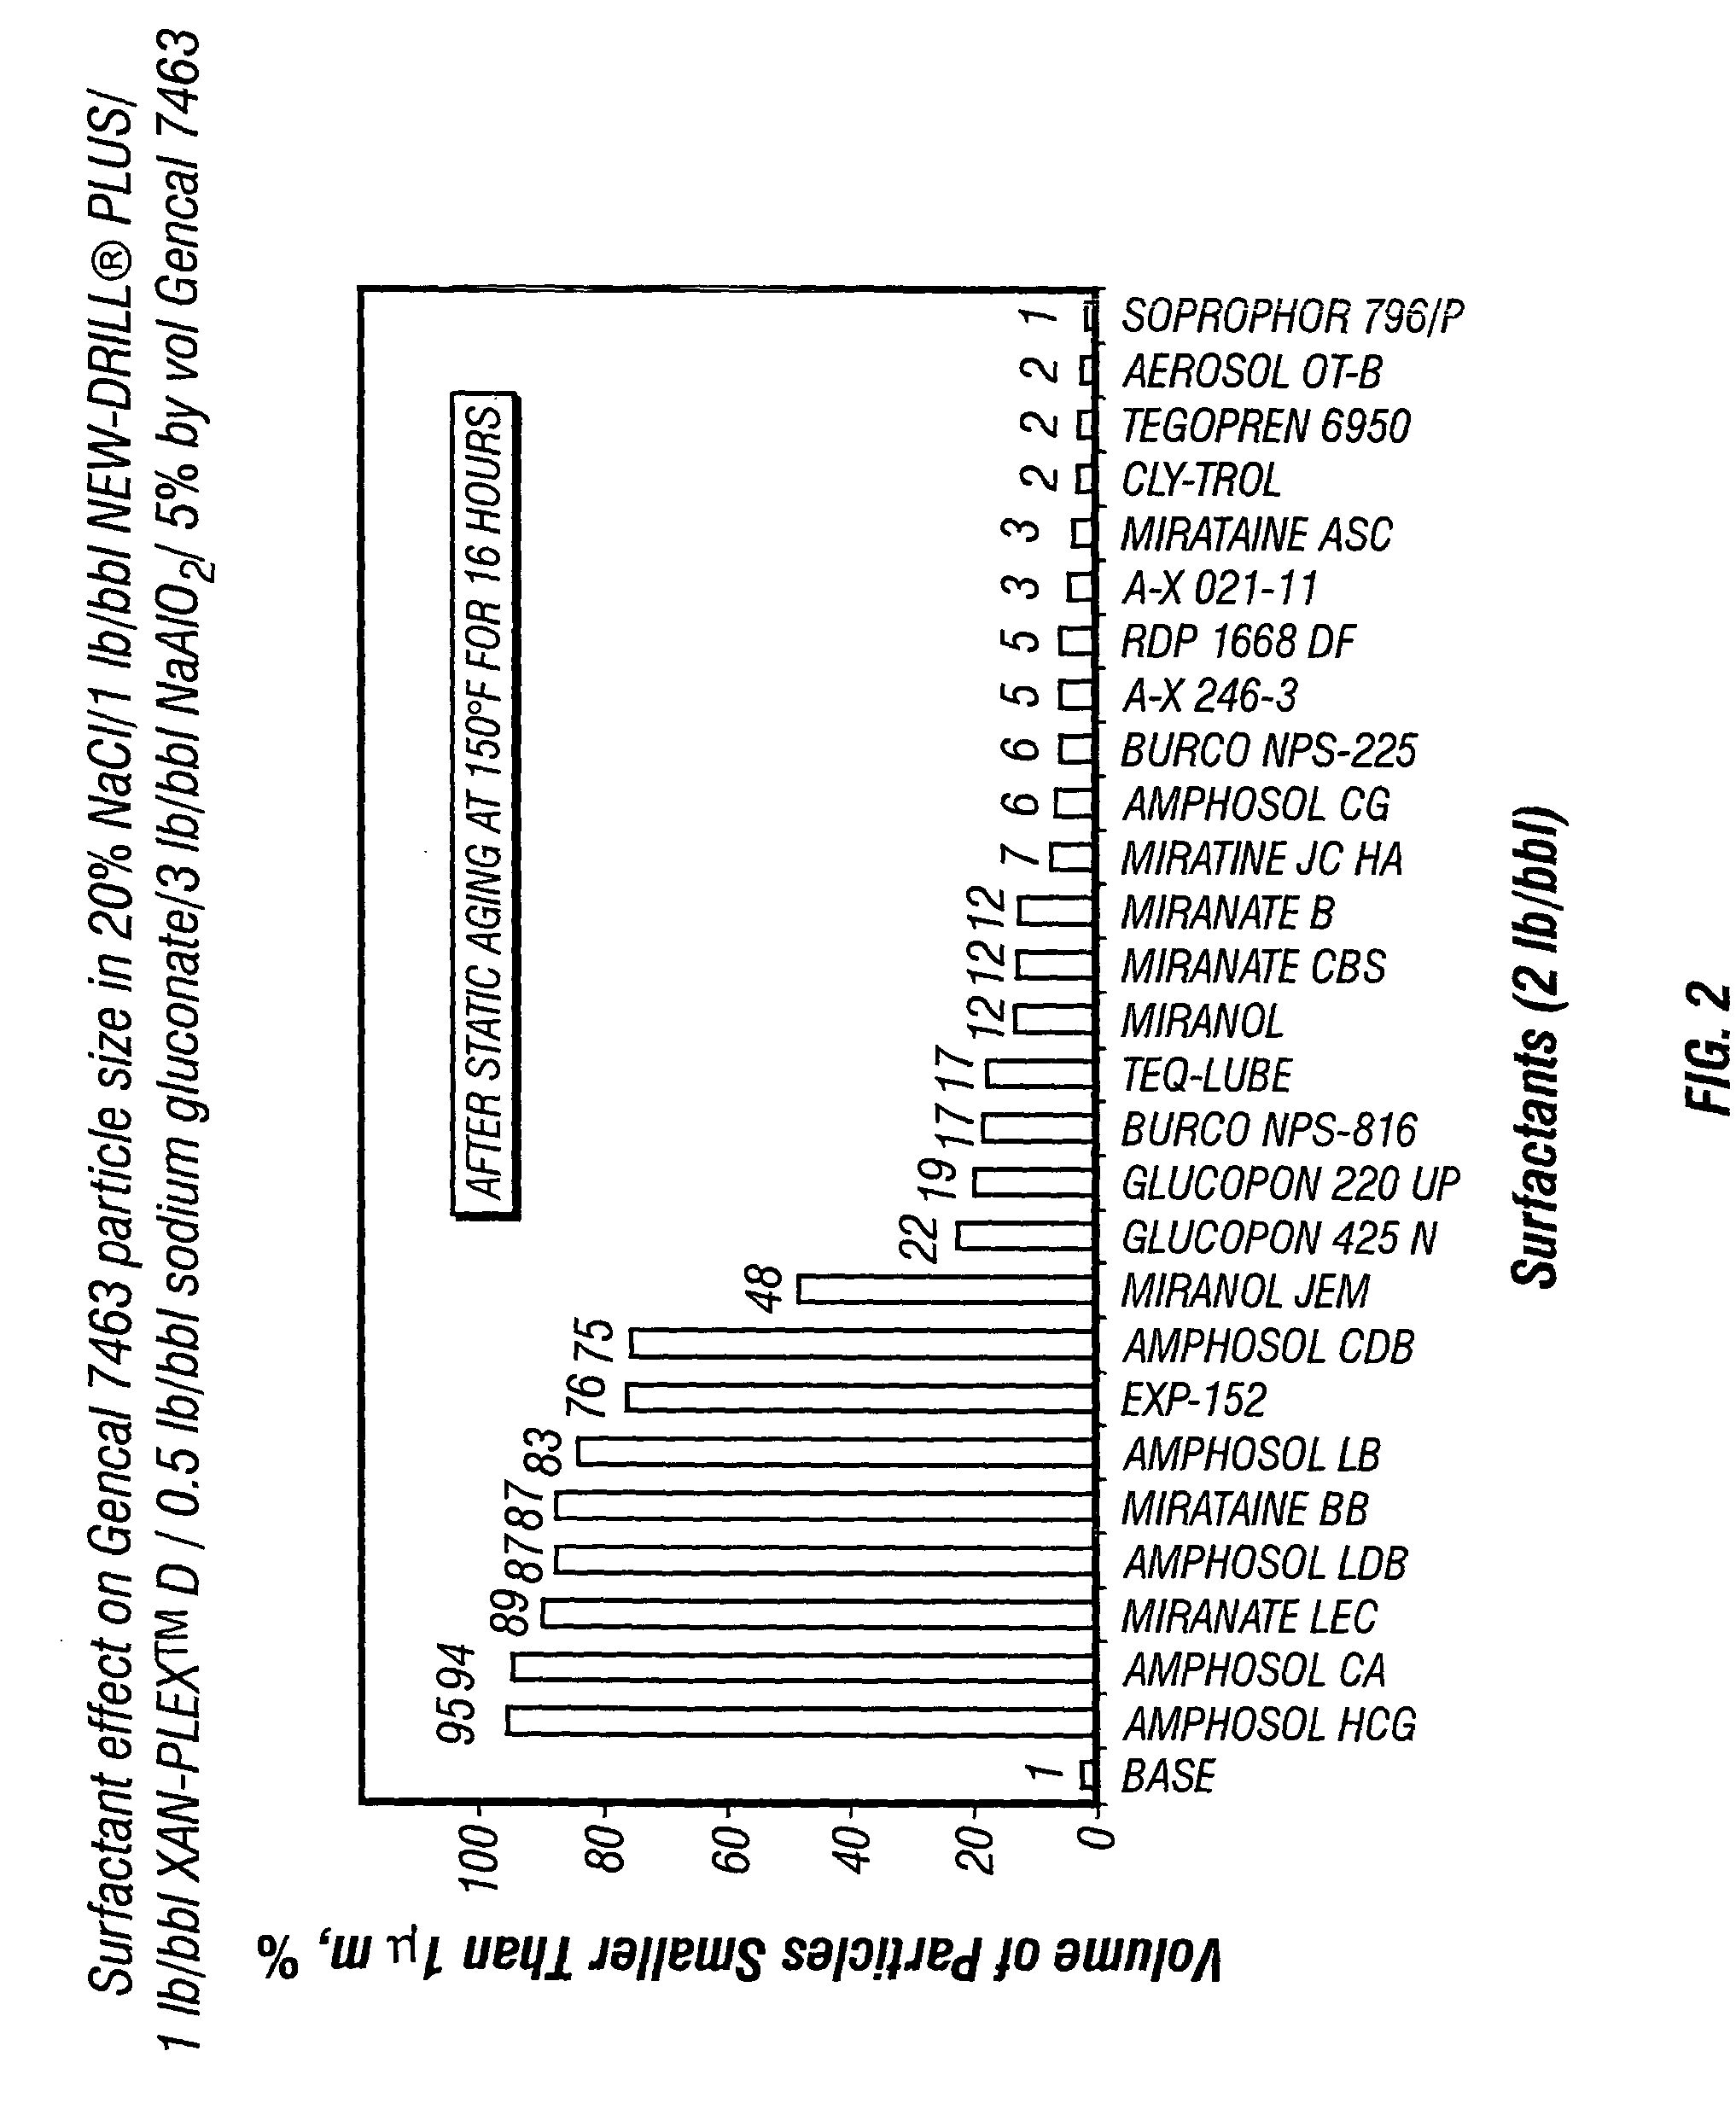 Fluid loss control and sealing agent for drilling depleted sand formations